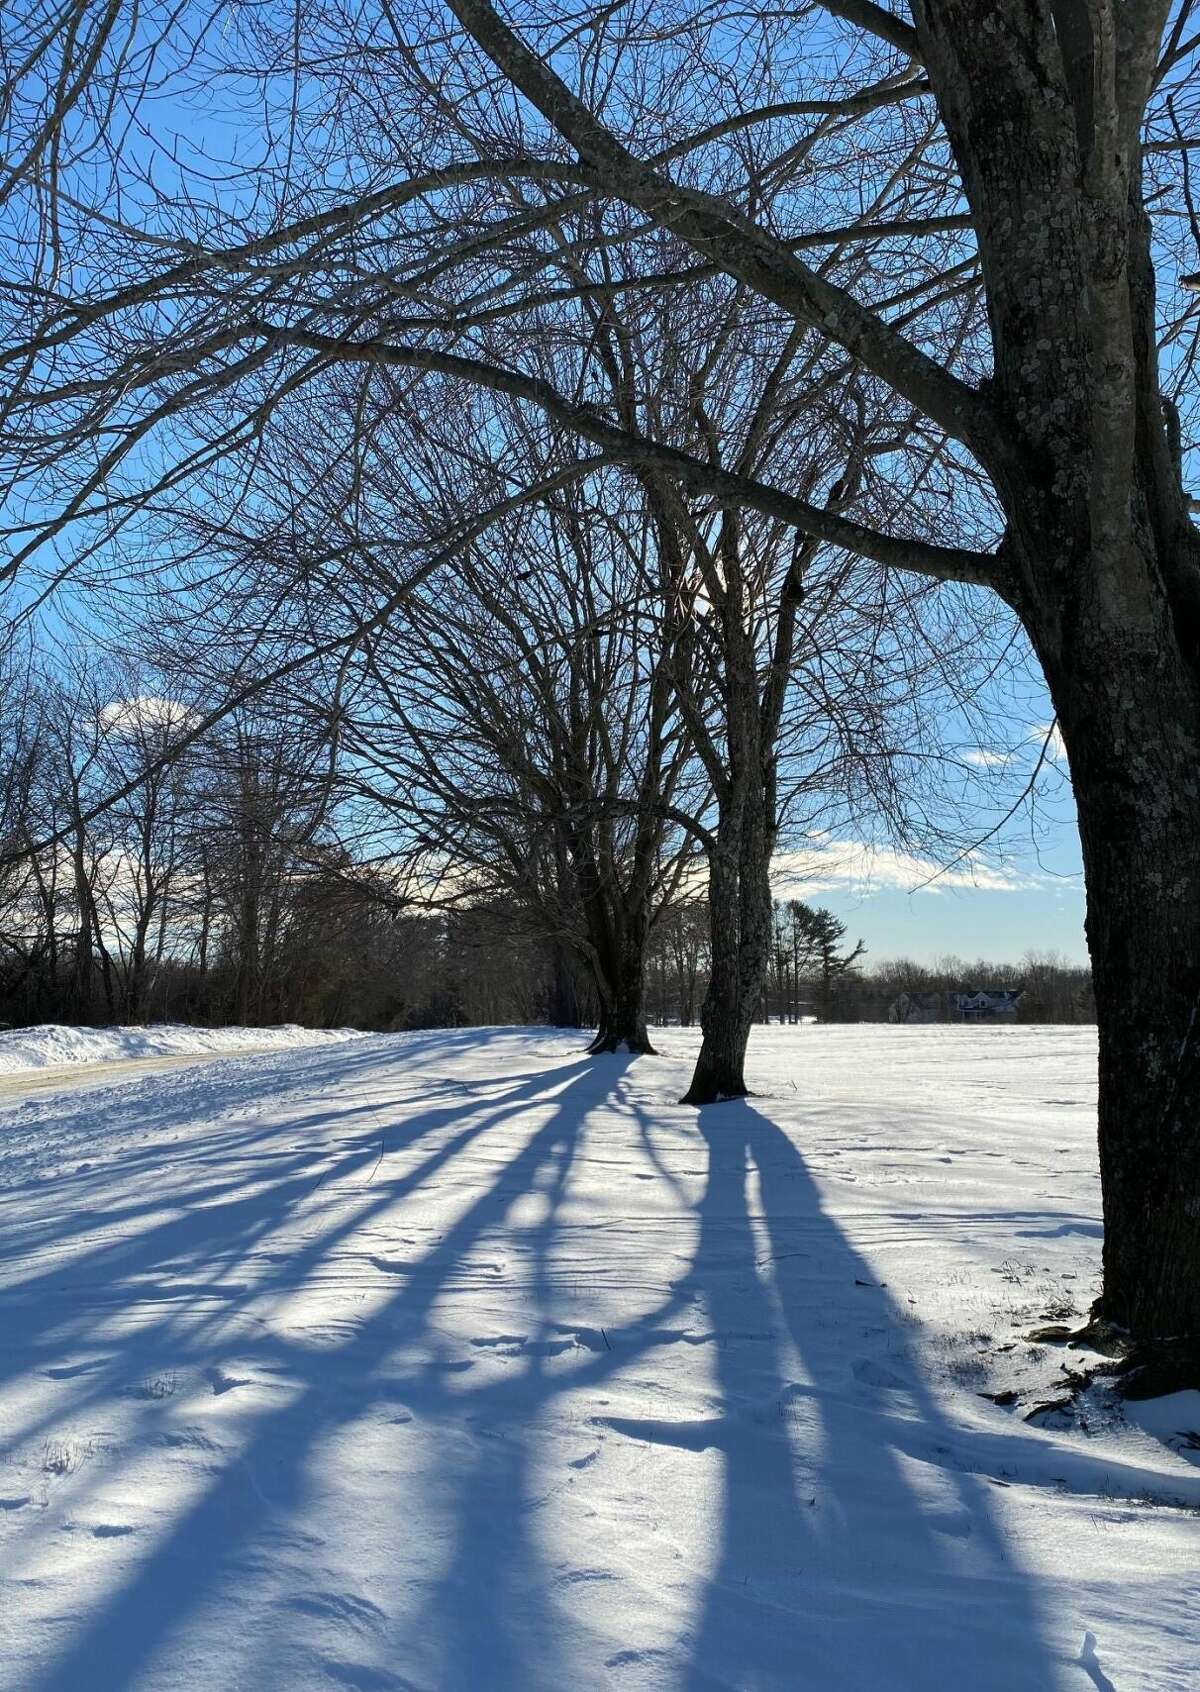 Spectrum/The early afternoon sun plays with the trees on Dorothy Diebold Lane in Roxbury, casting shadows of all sizes, December 2020. For "Images" 12/25/20